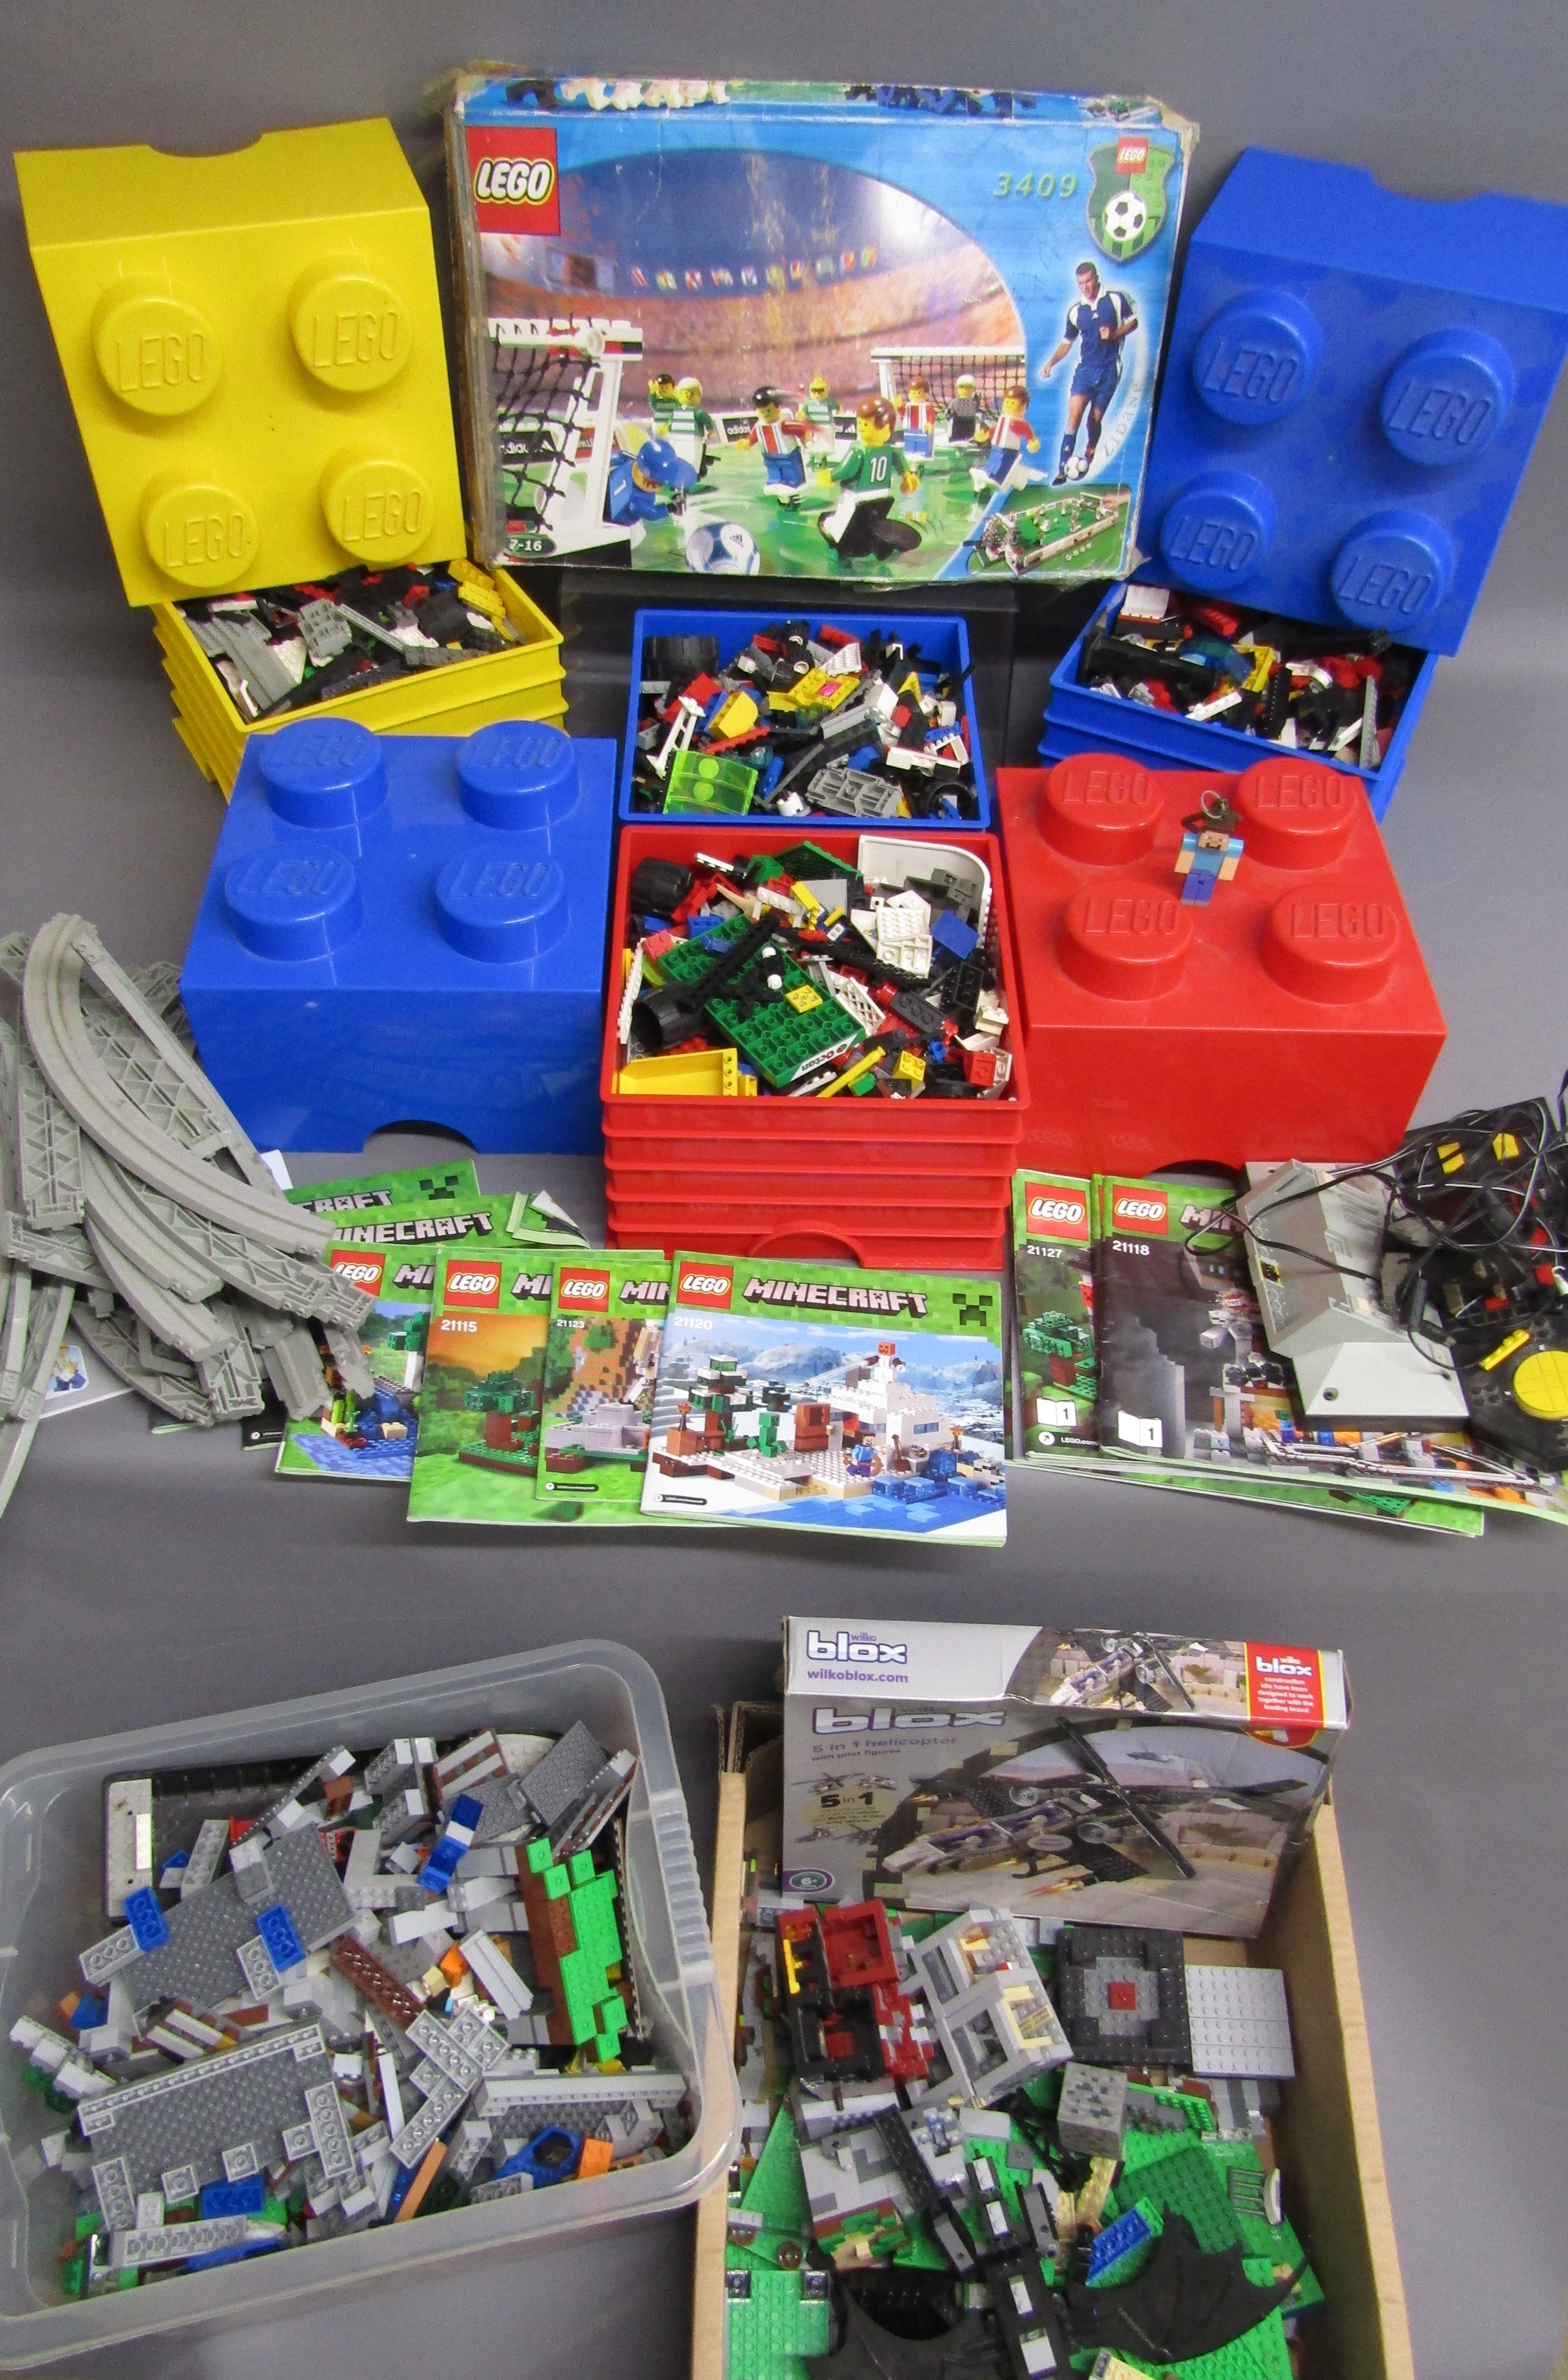 Large collection of Lego and other building bricks along with Lego storage tubs - includes